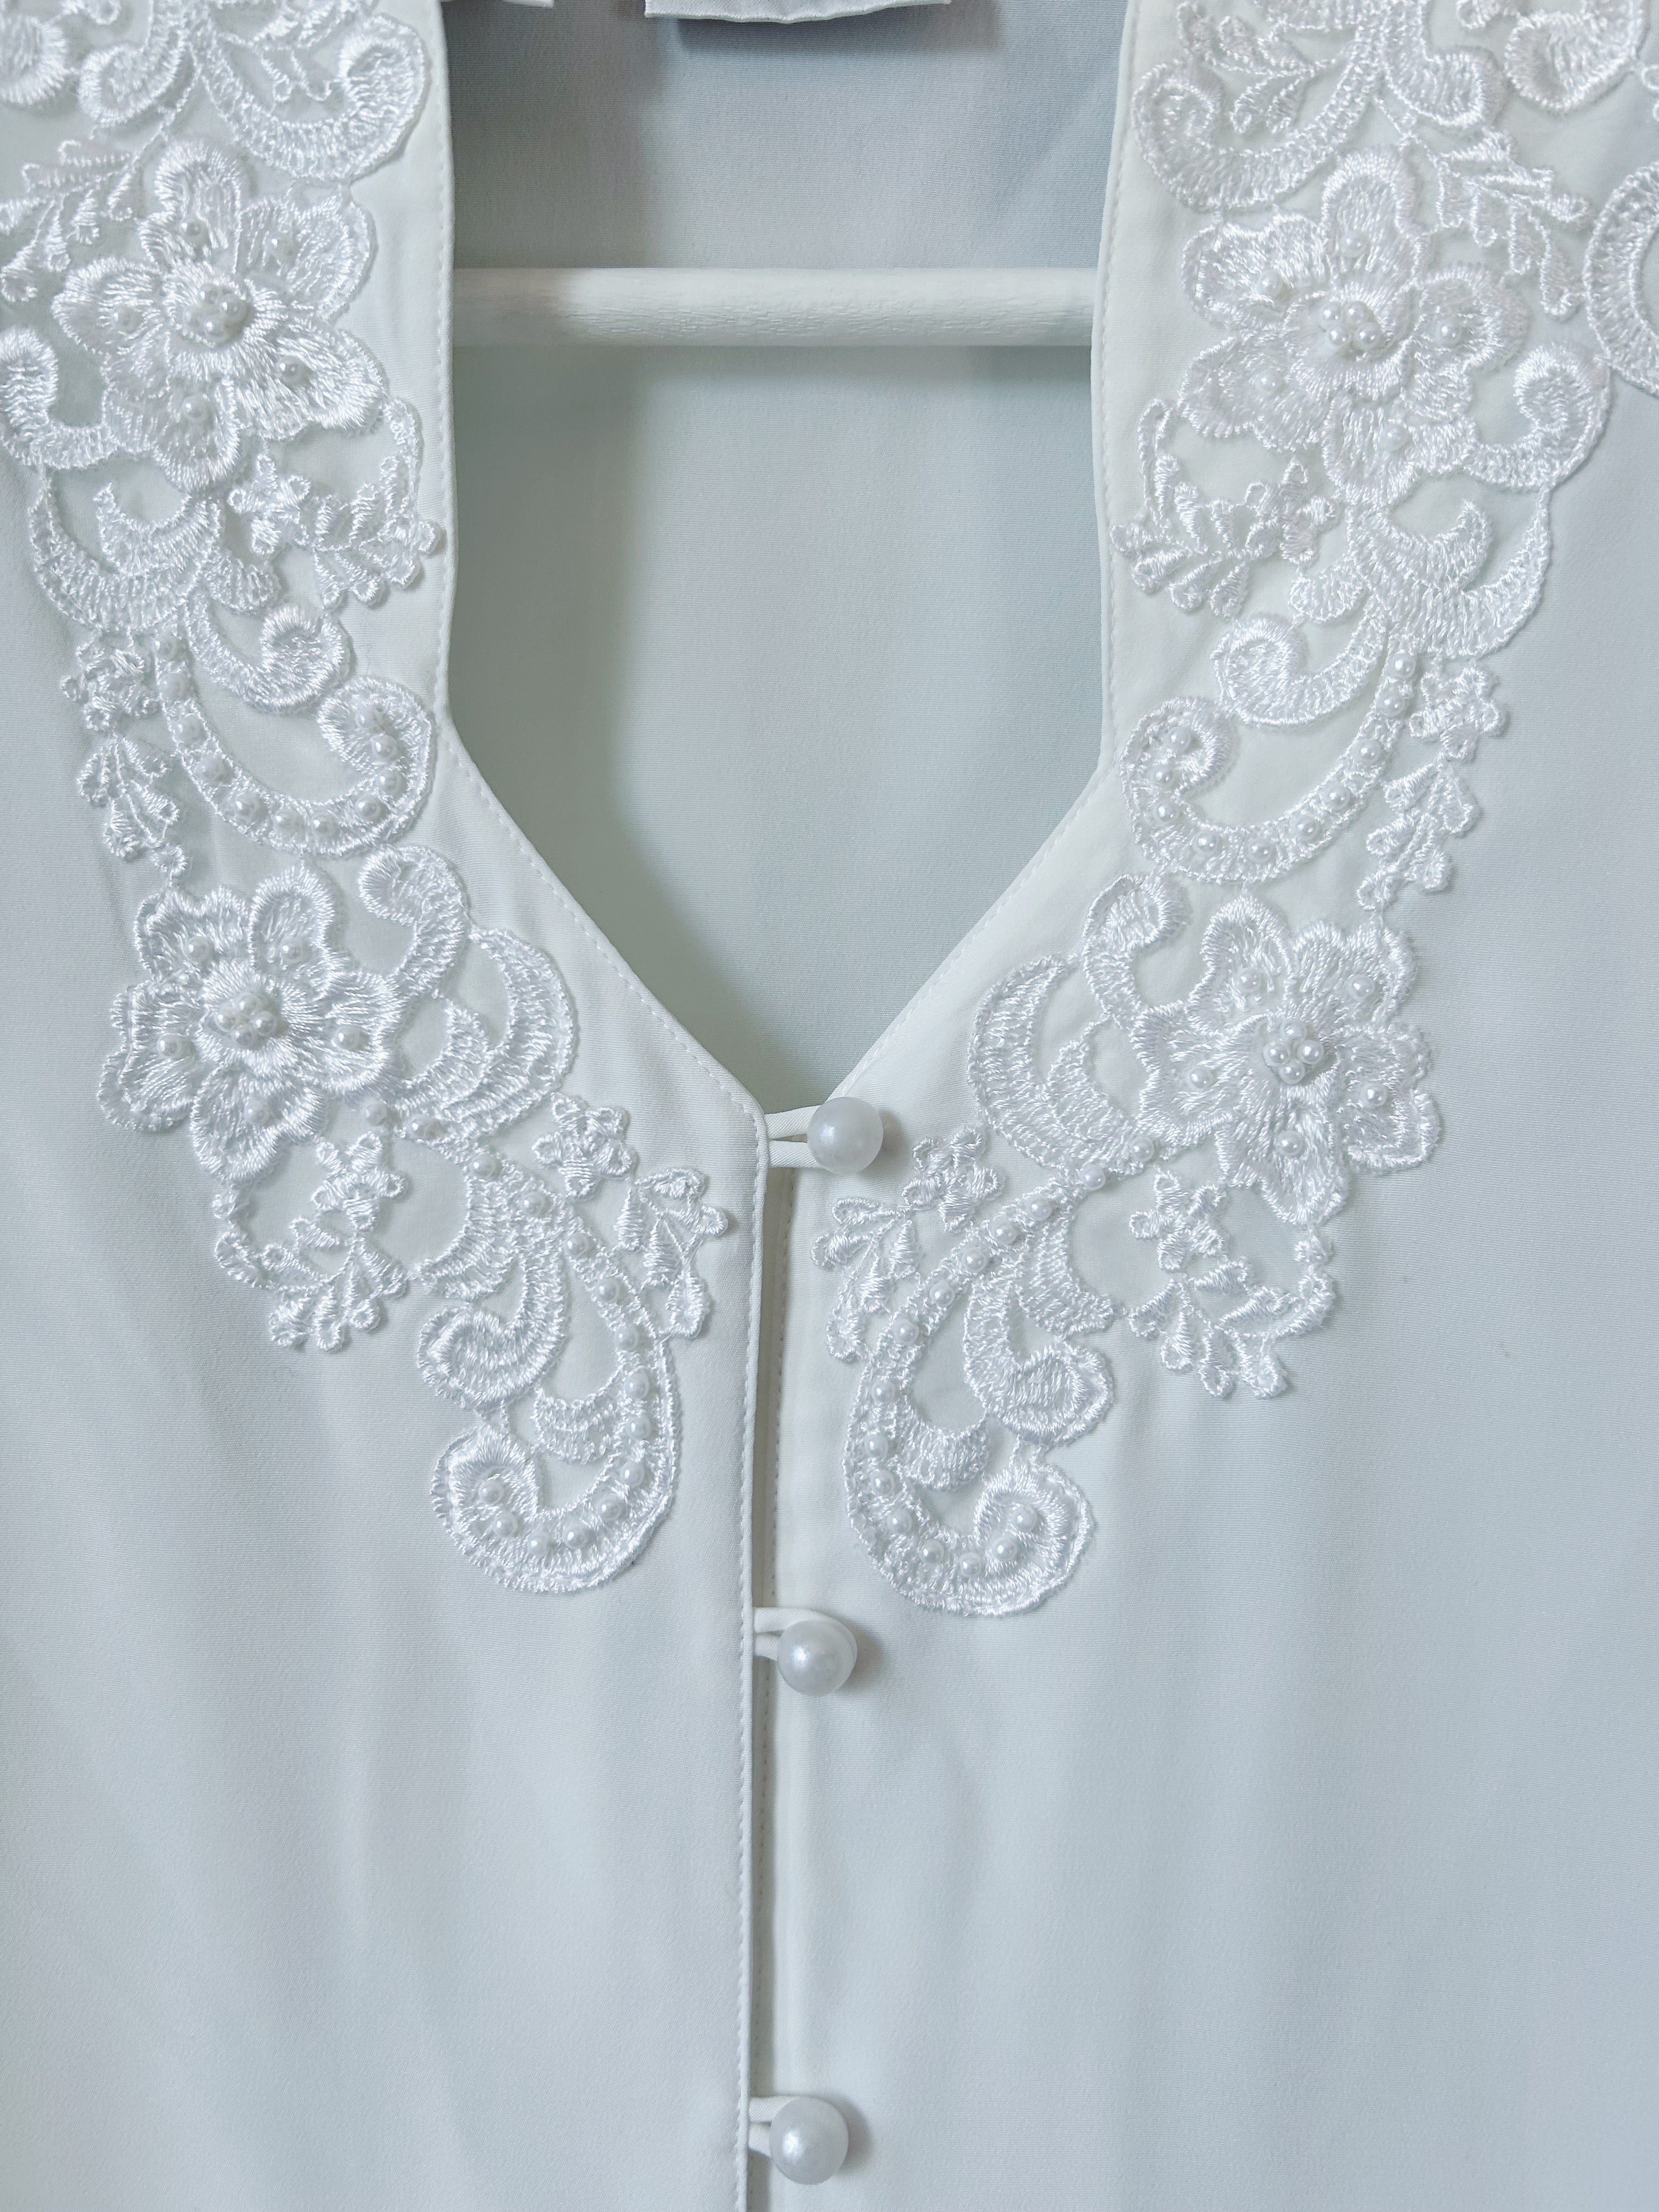 Vintage White Delicate Beaded Embroidered